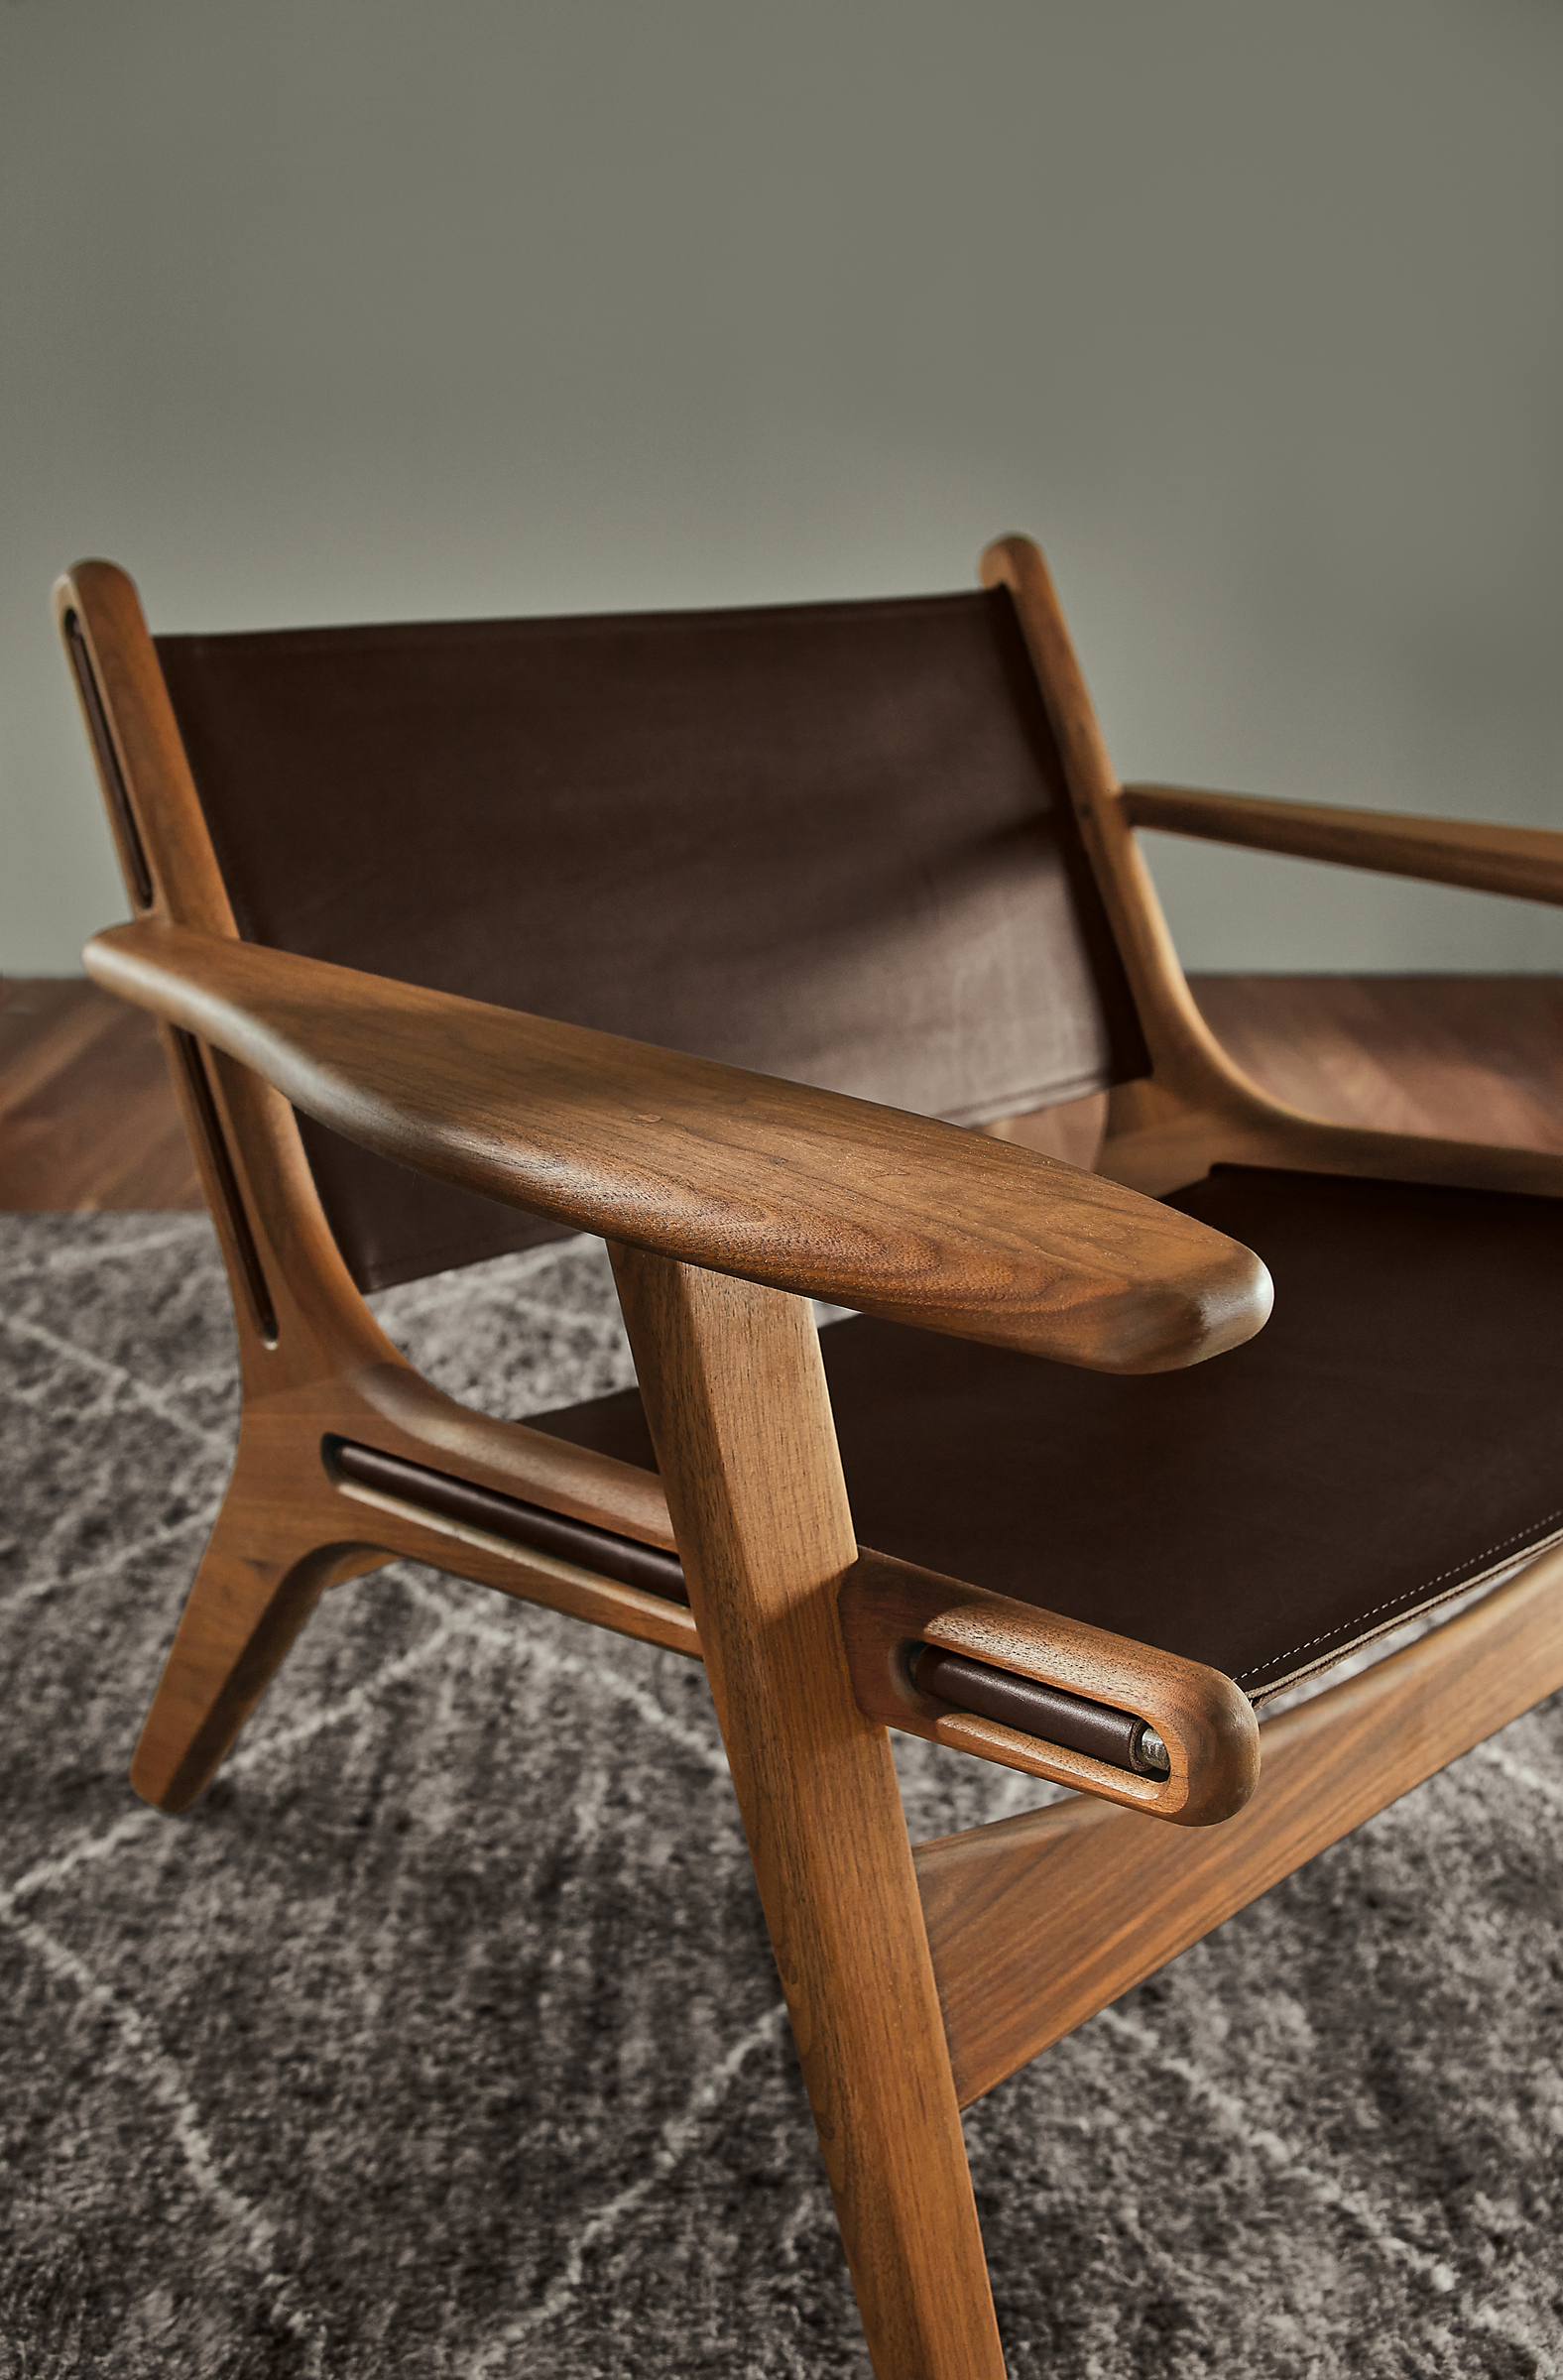 close-up of lars lounge chair in walnut and sellare smoke leather, set on kalindi rug in charcoal.